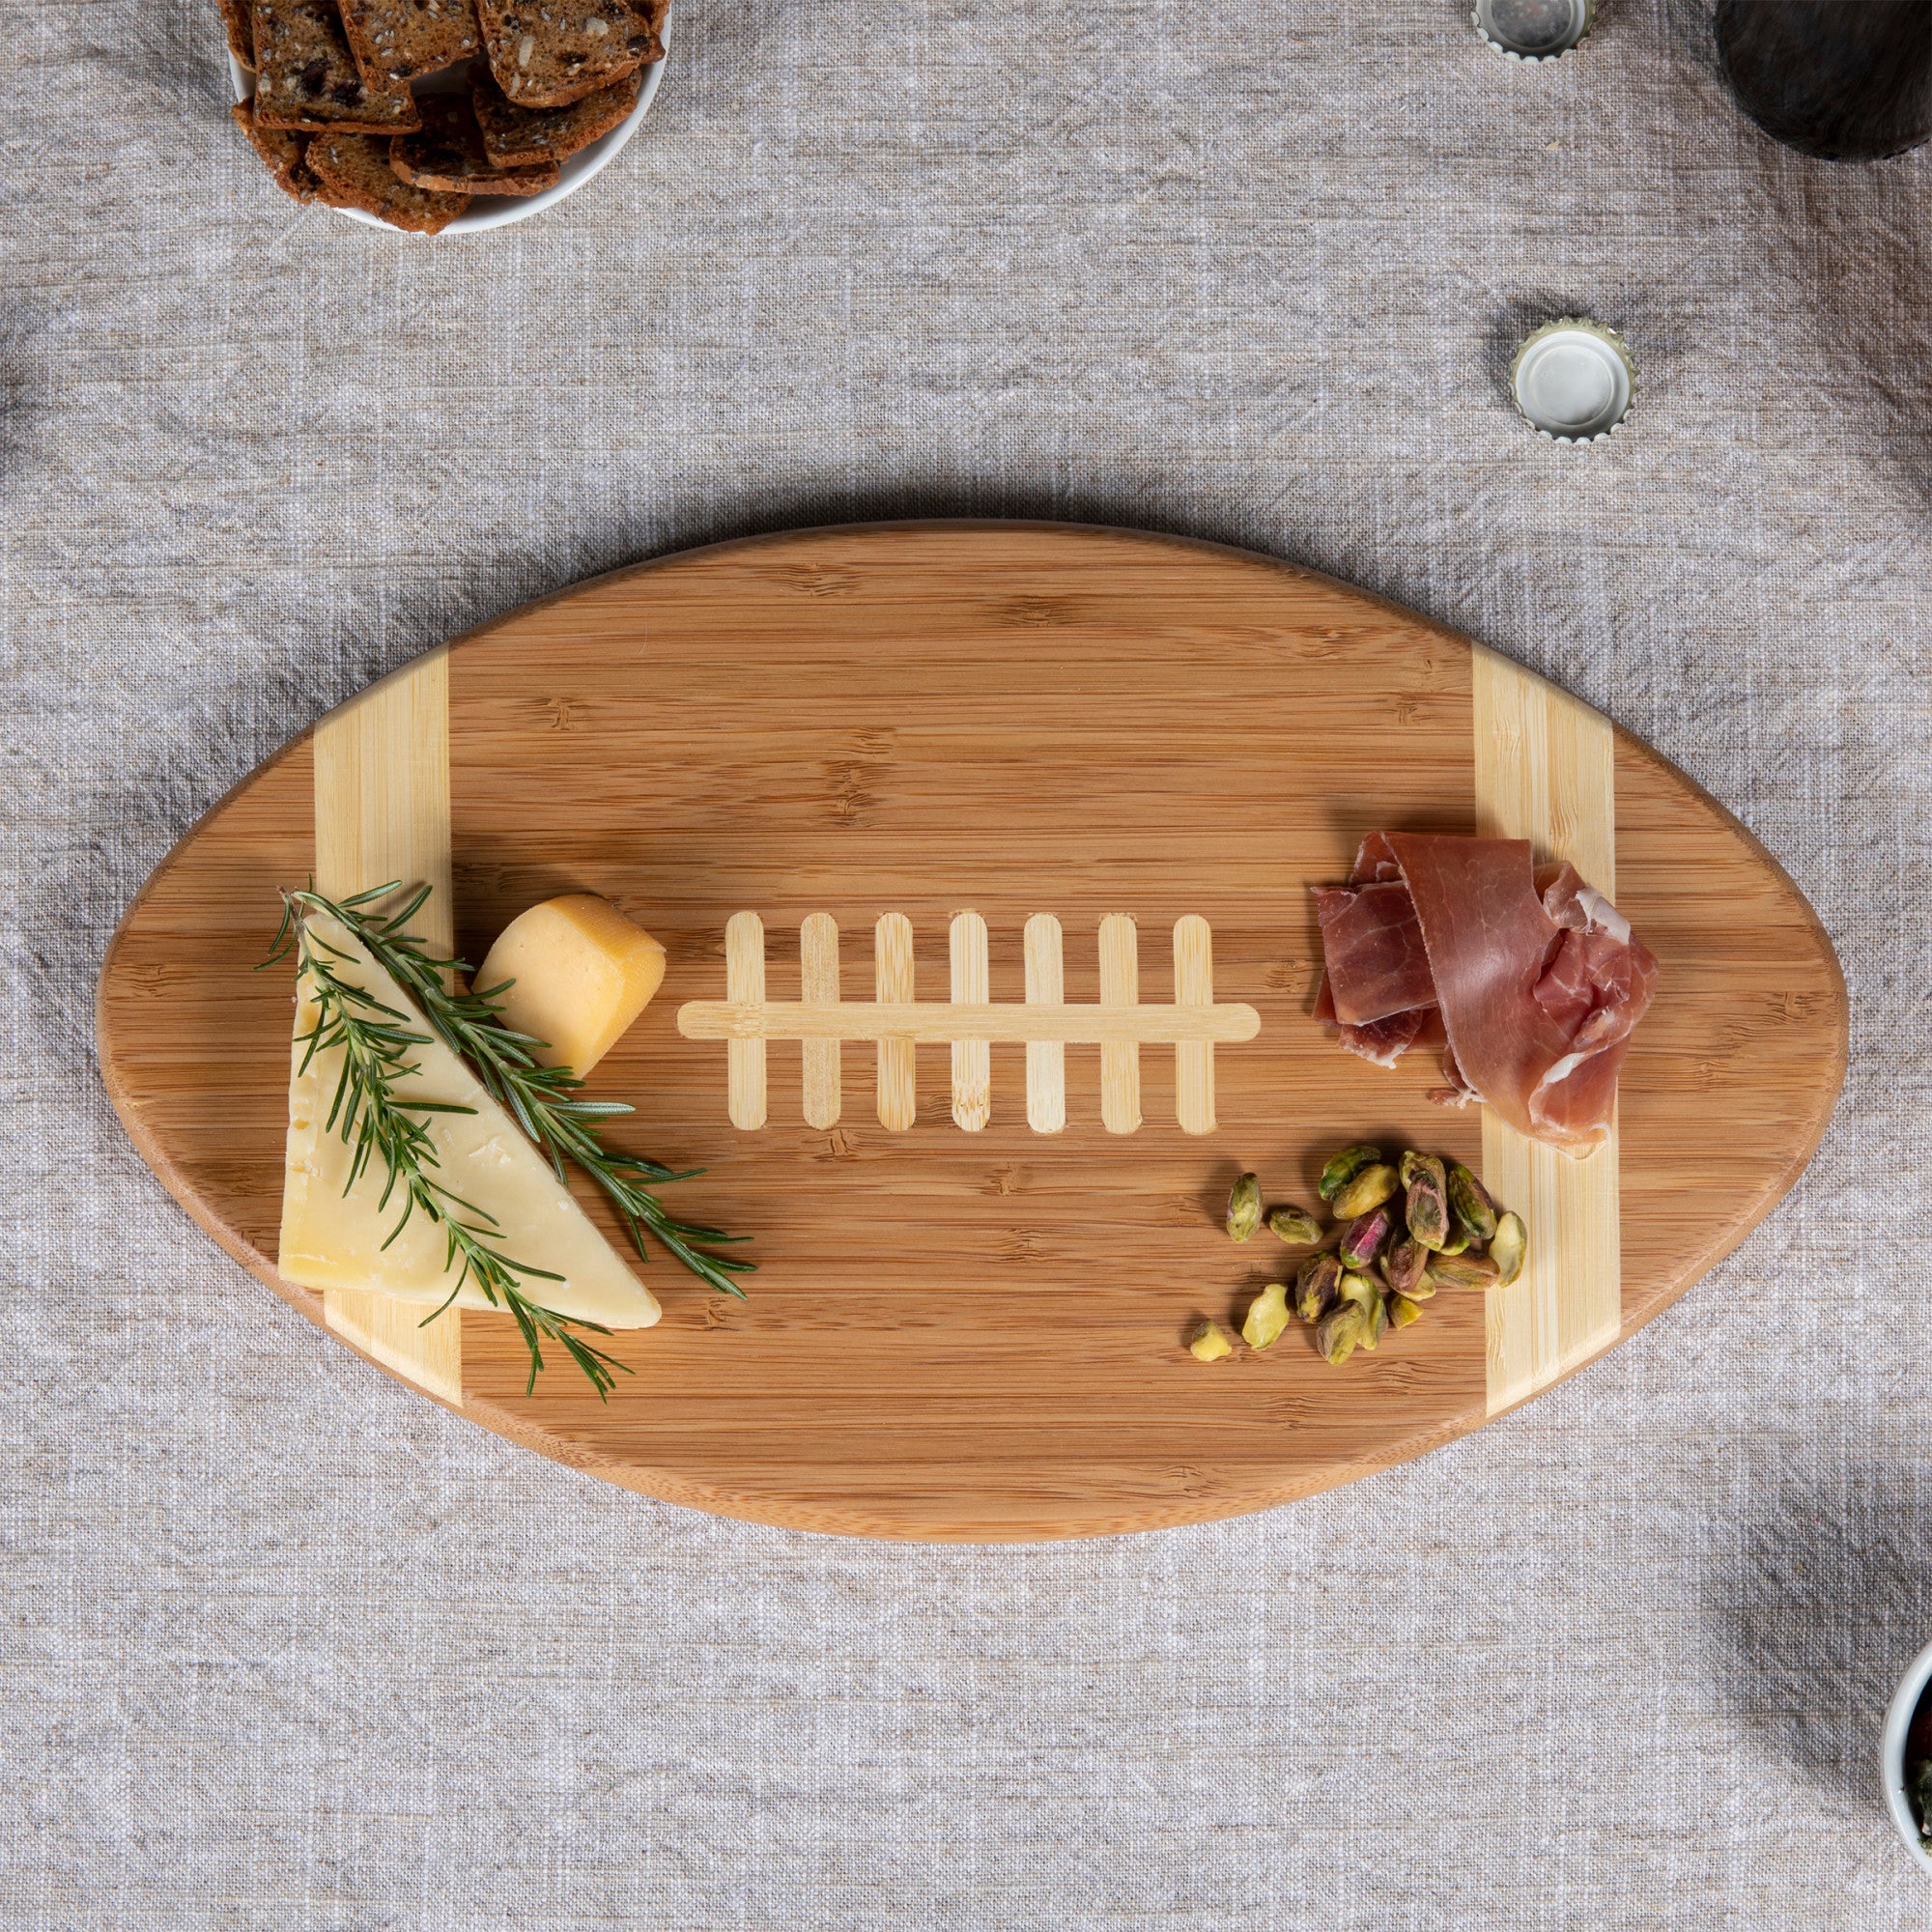 Dallas Cowboys Glass Top Cutting Board – PICNIC TIME FAMILY OF BRANDS